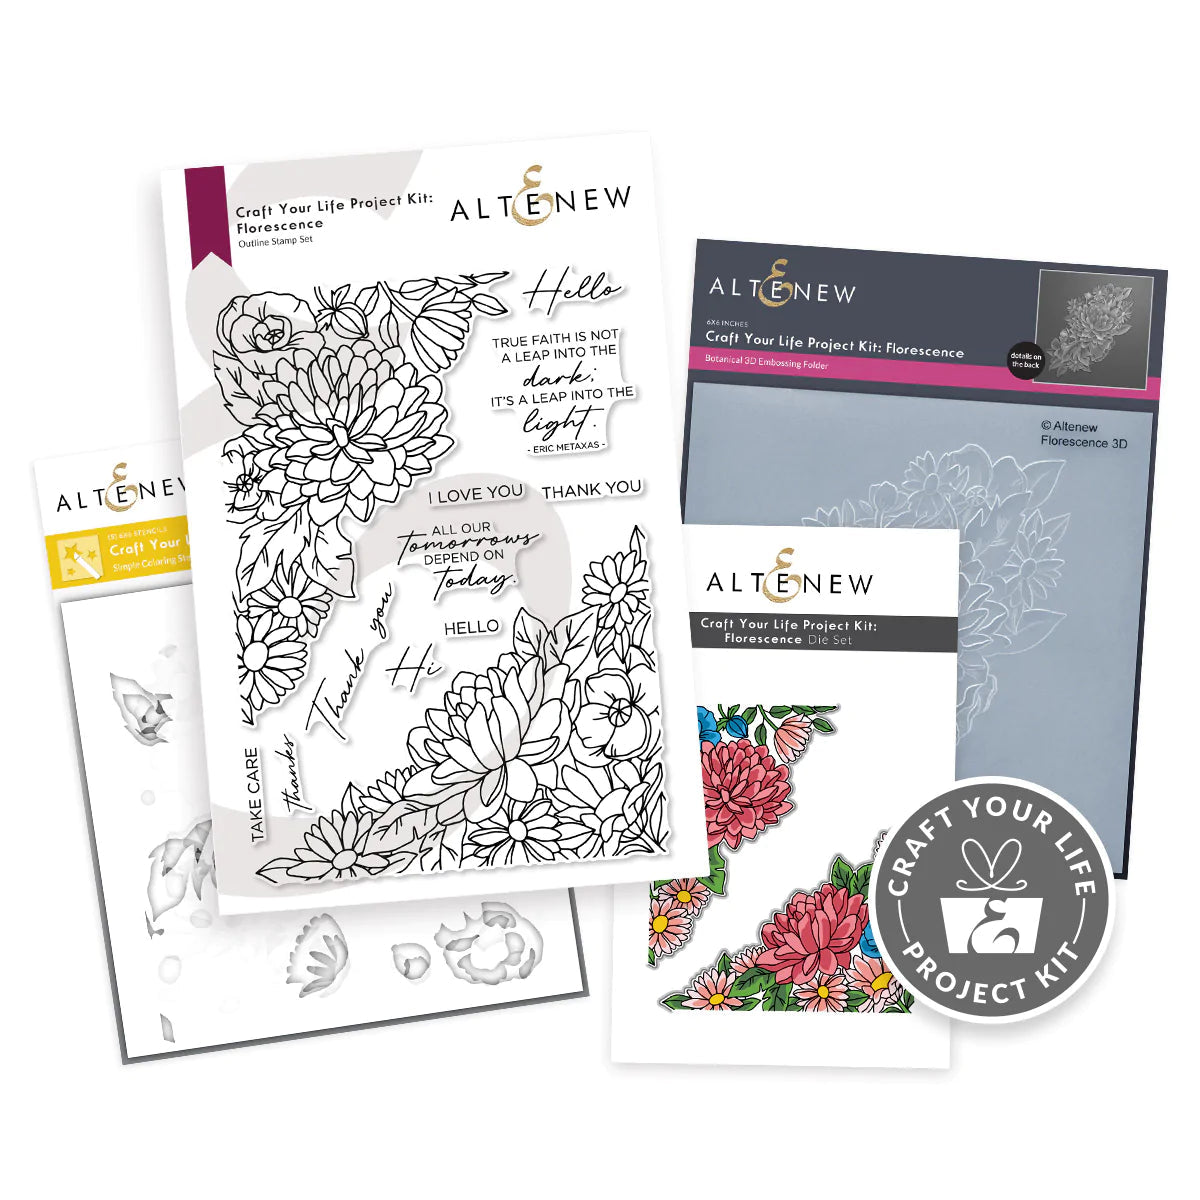 Romance blooms on new Love Forever stamps - Newsroom 